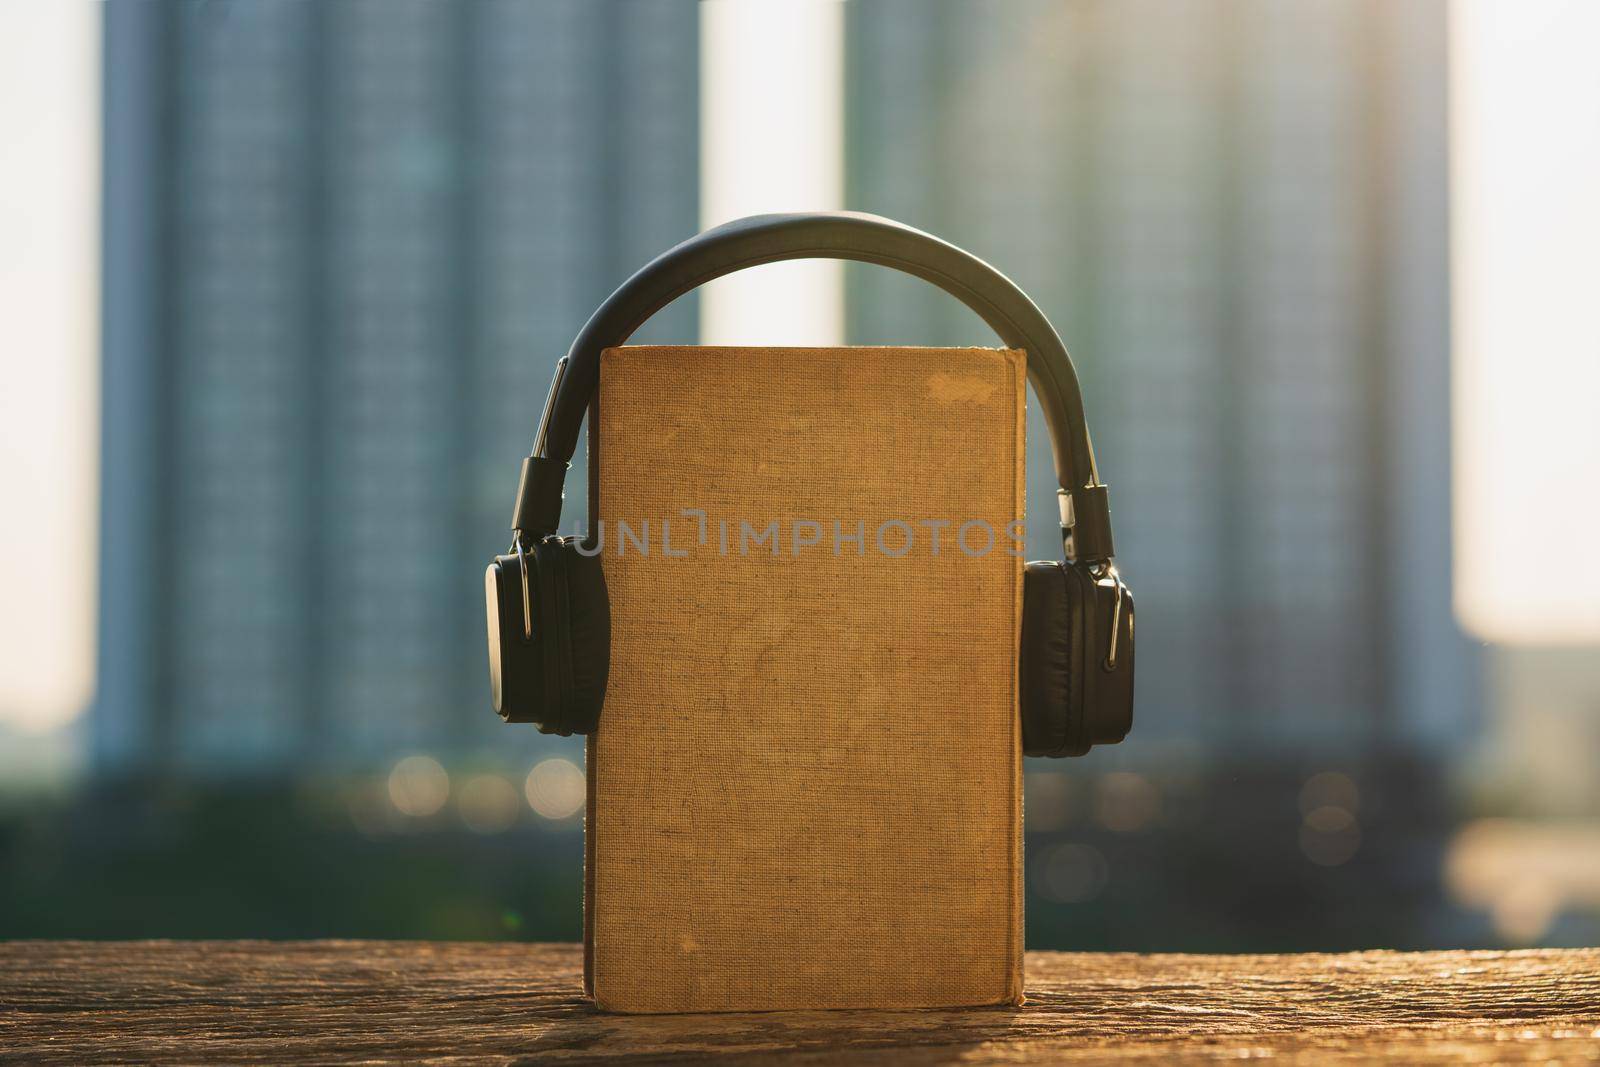 Audio book concept. Headphones and old book on wood with city background